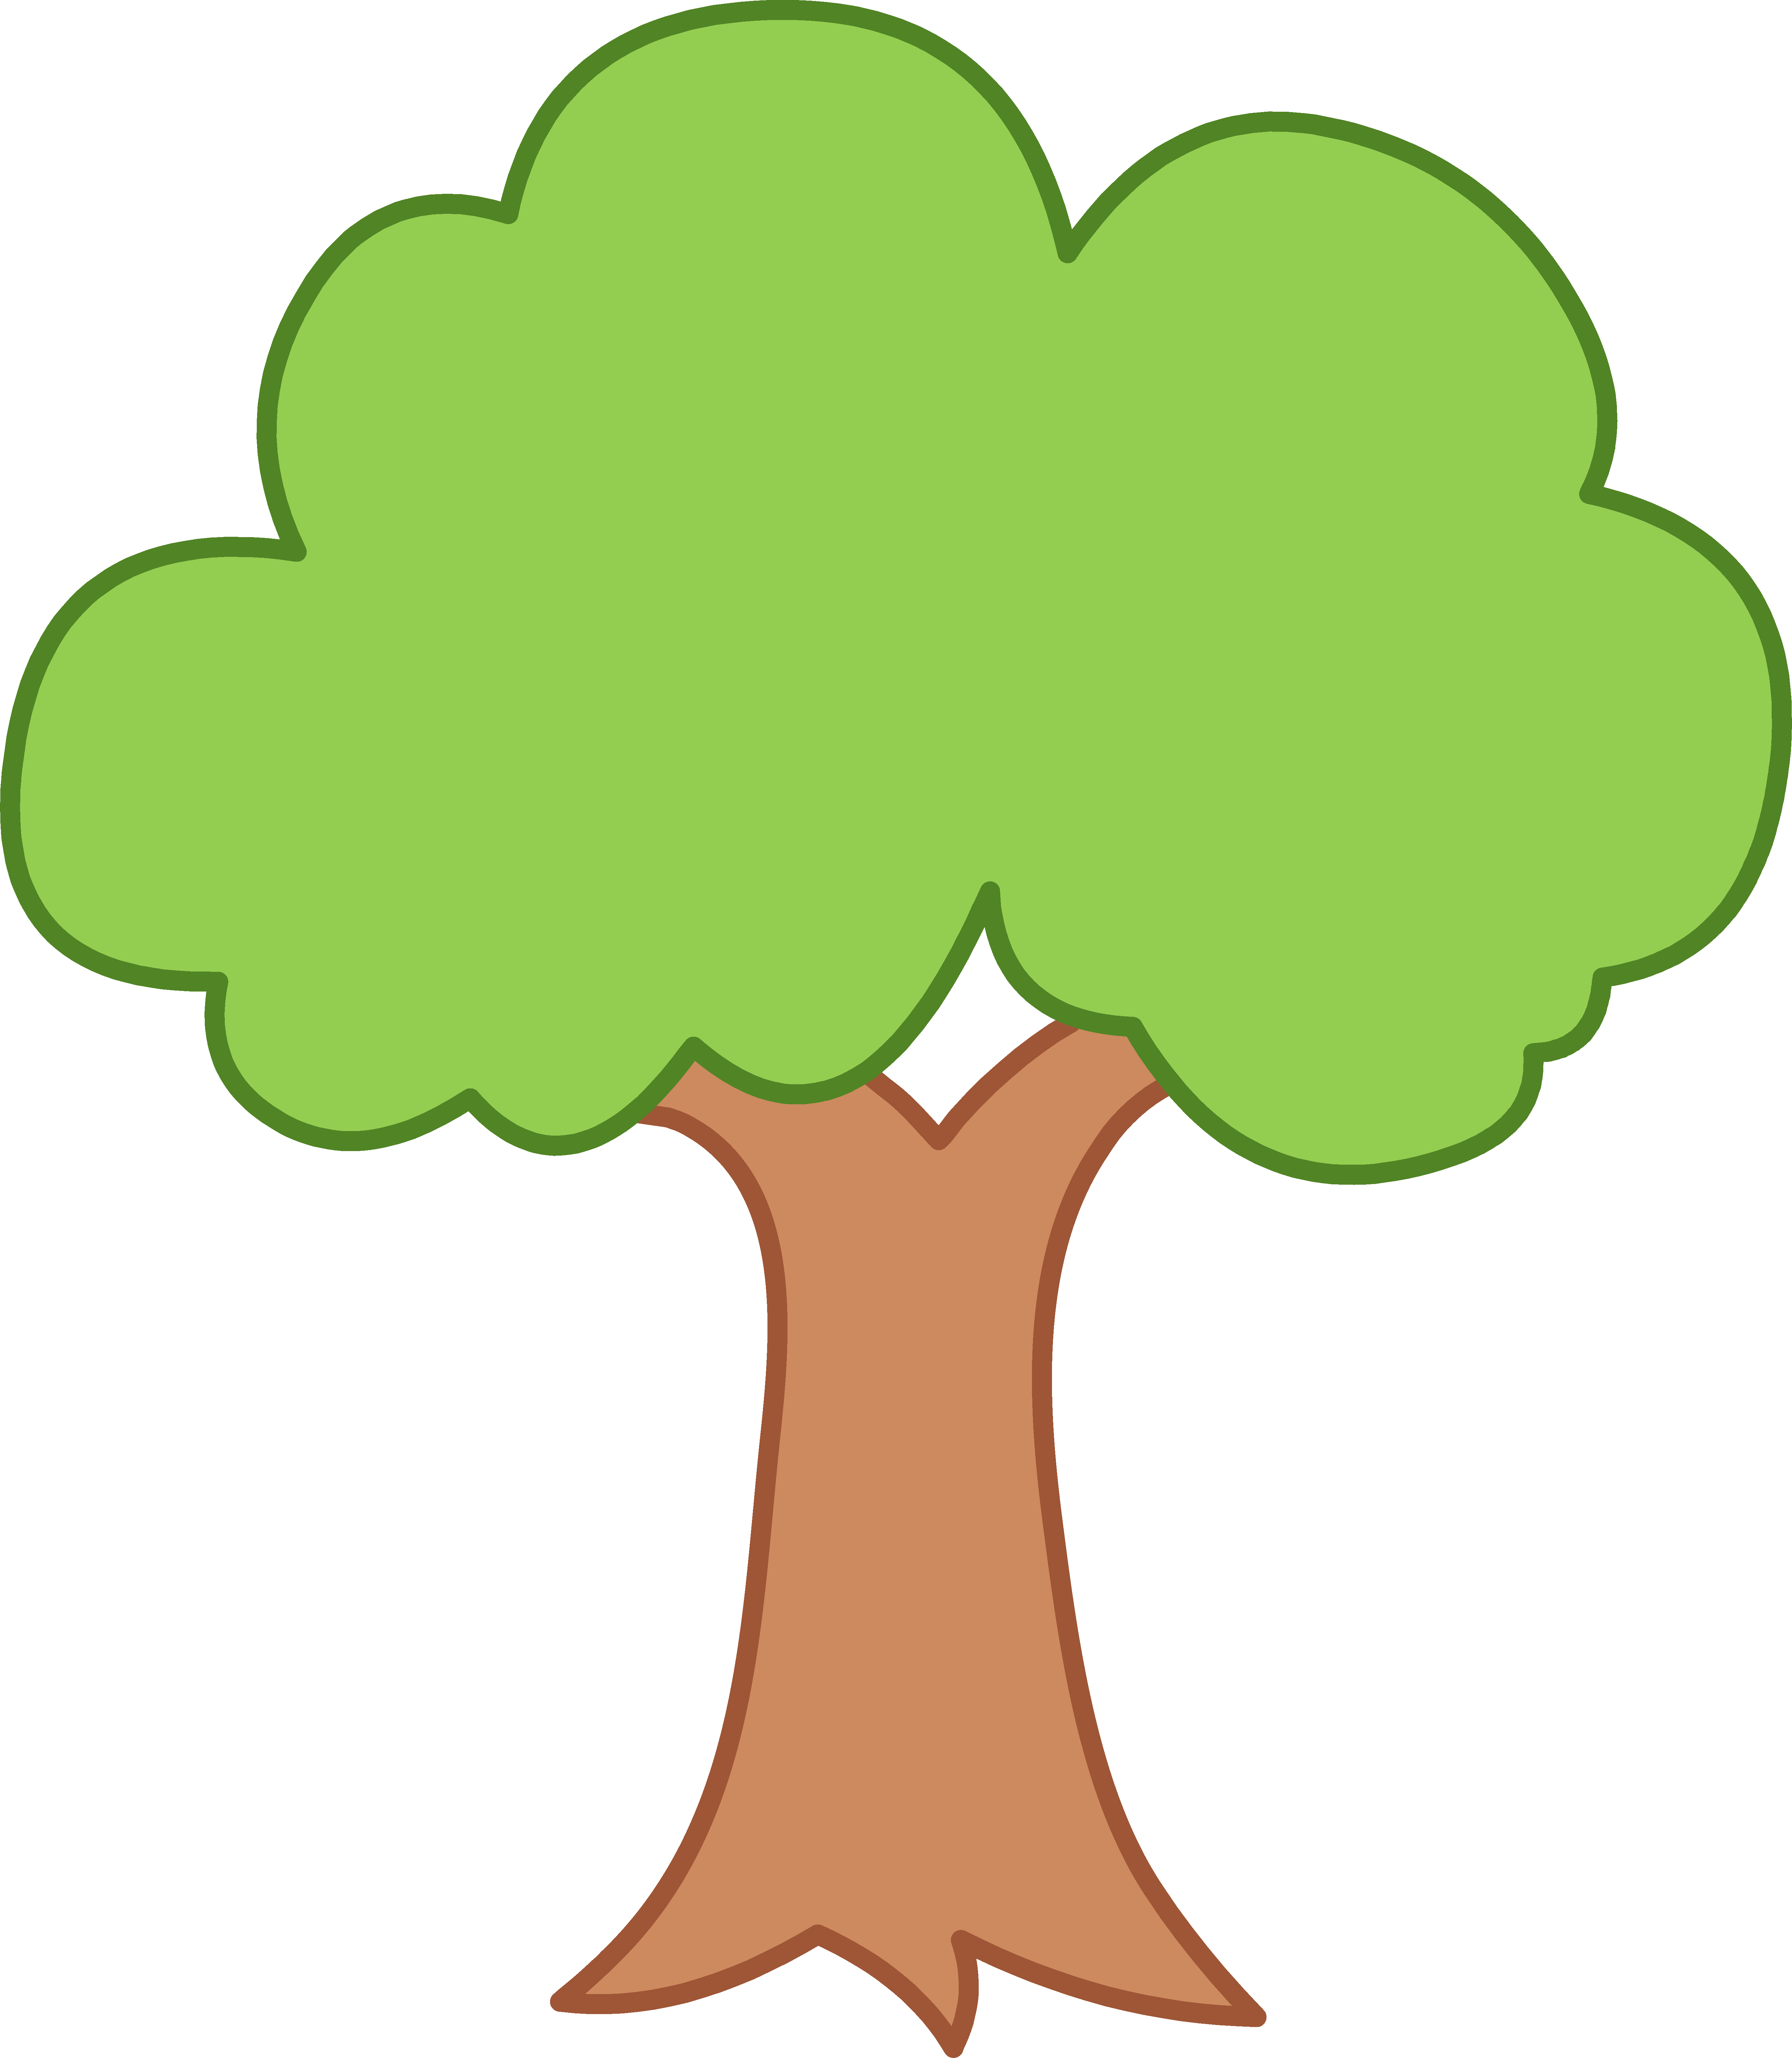 Tree in the tree clipart - Clipground